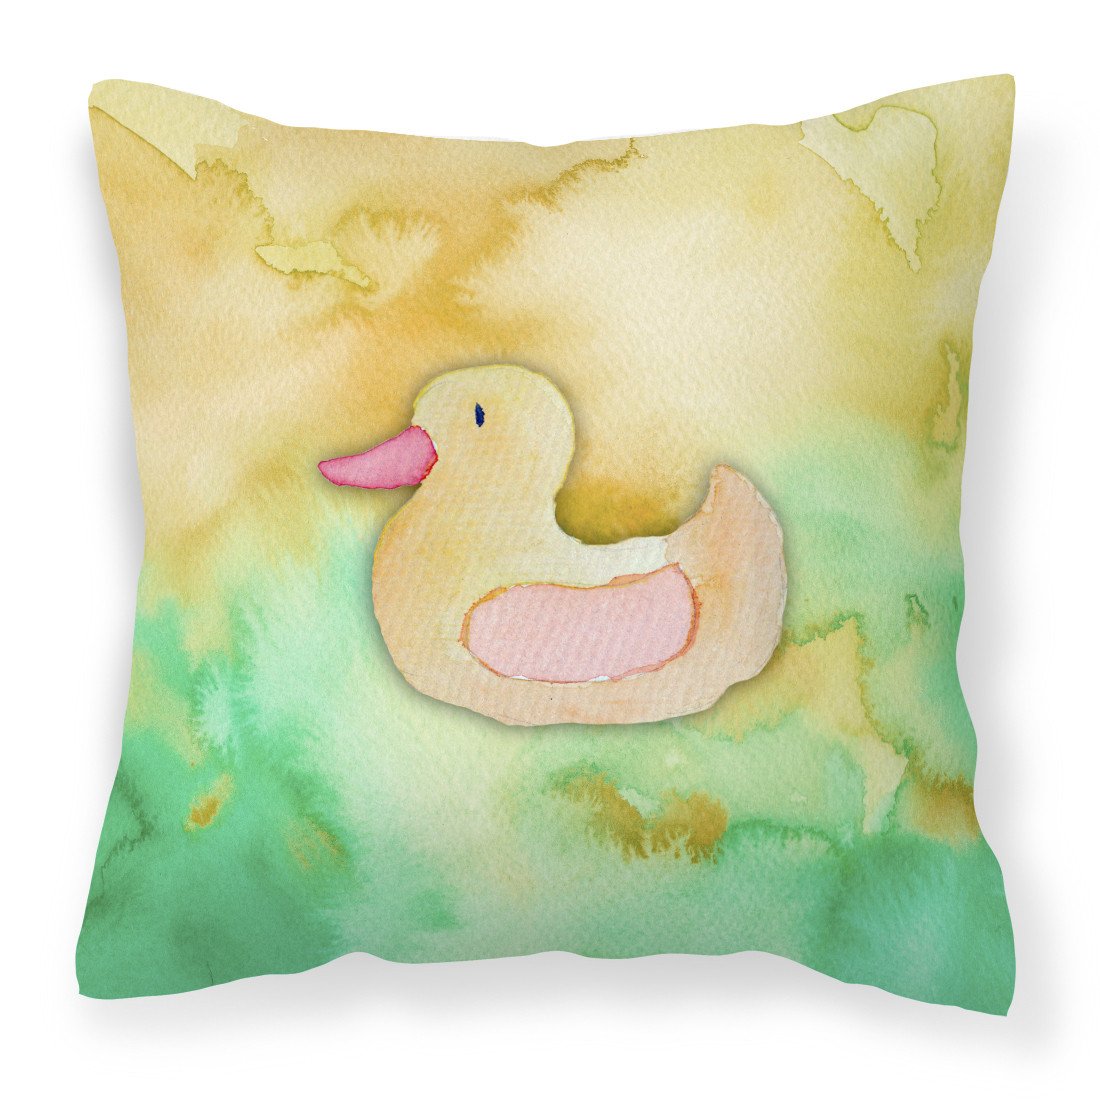 Rubber Duckie Watercolor Fabric Decorative Pillow BB7351PW1818 by Caroline's Treasures